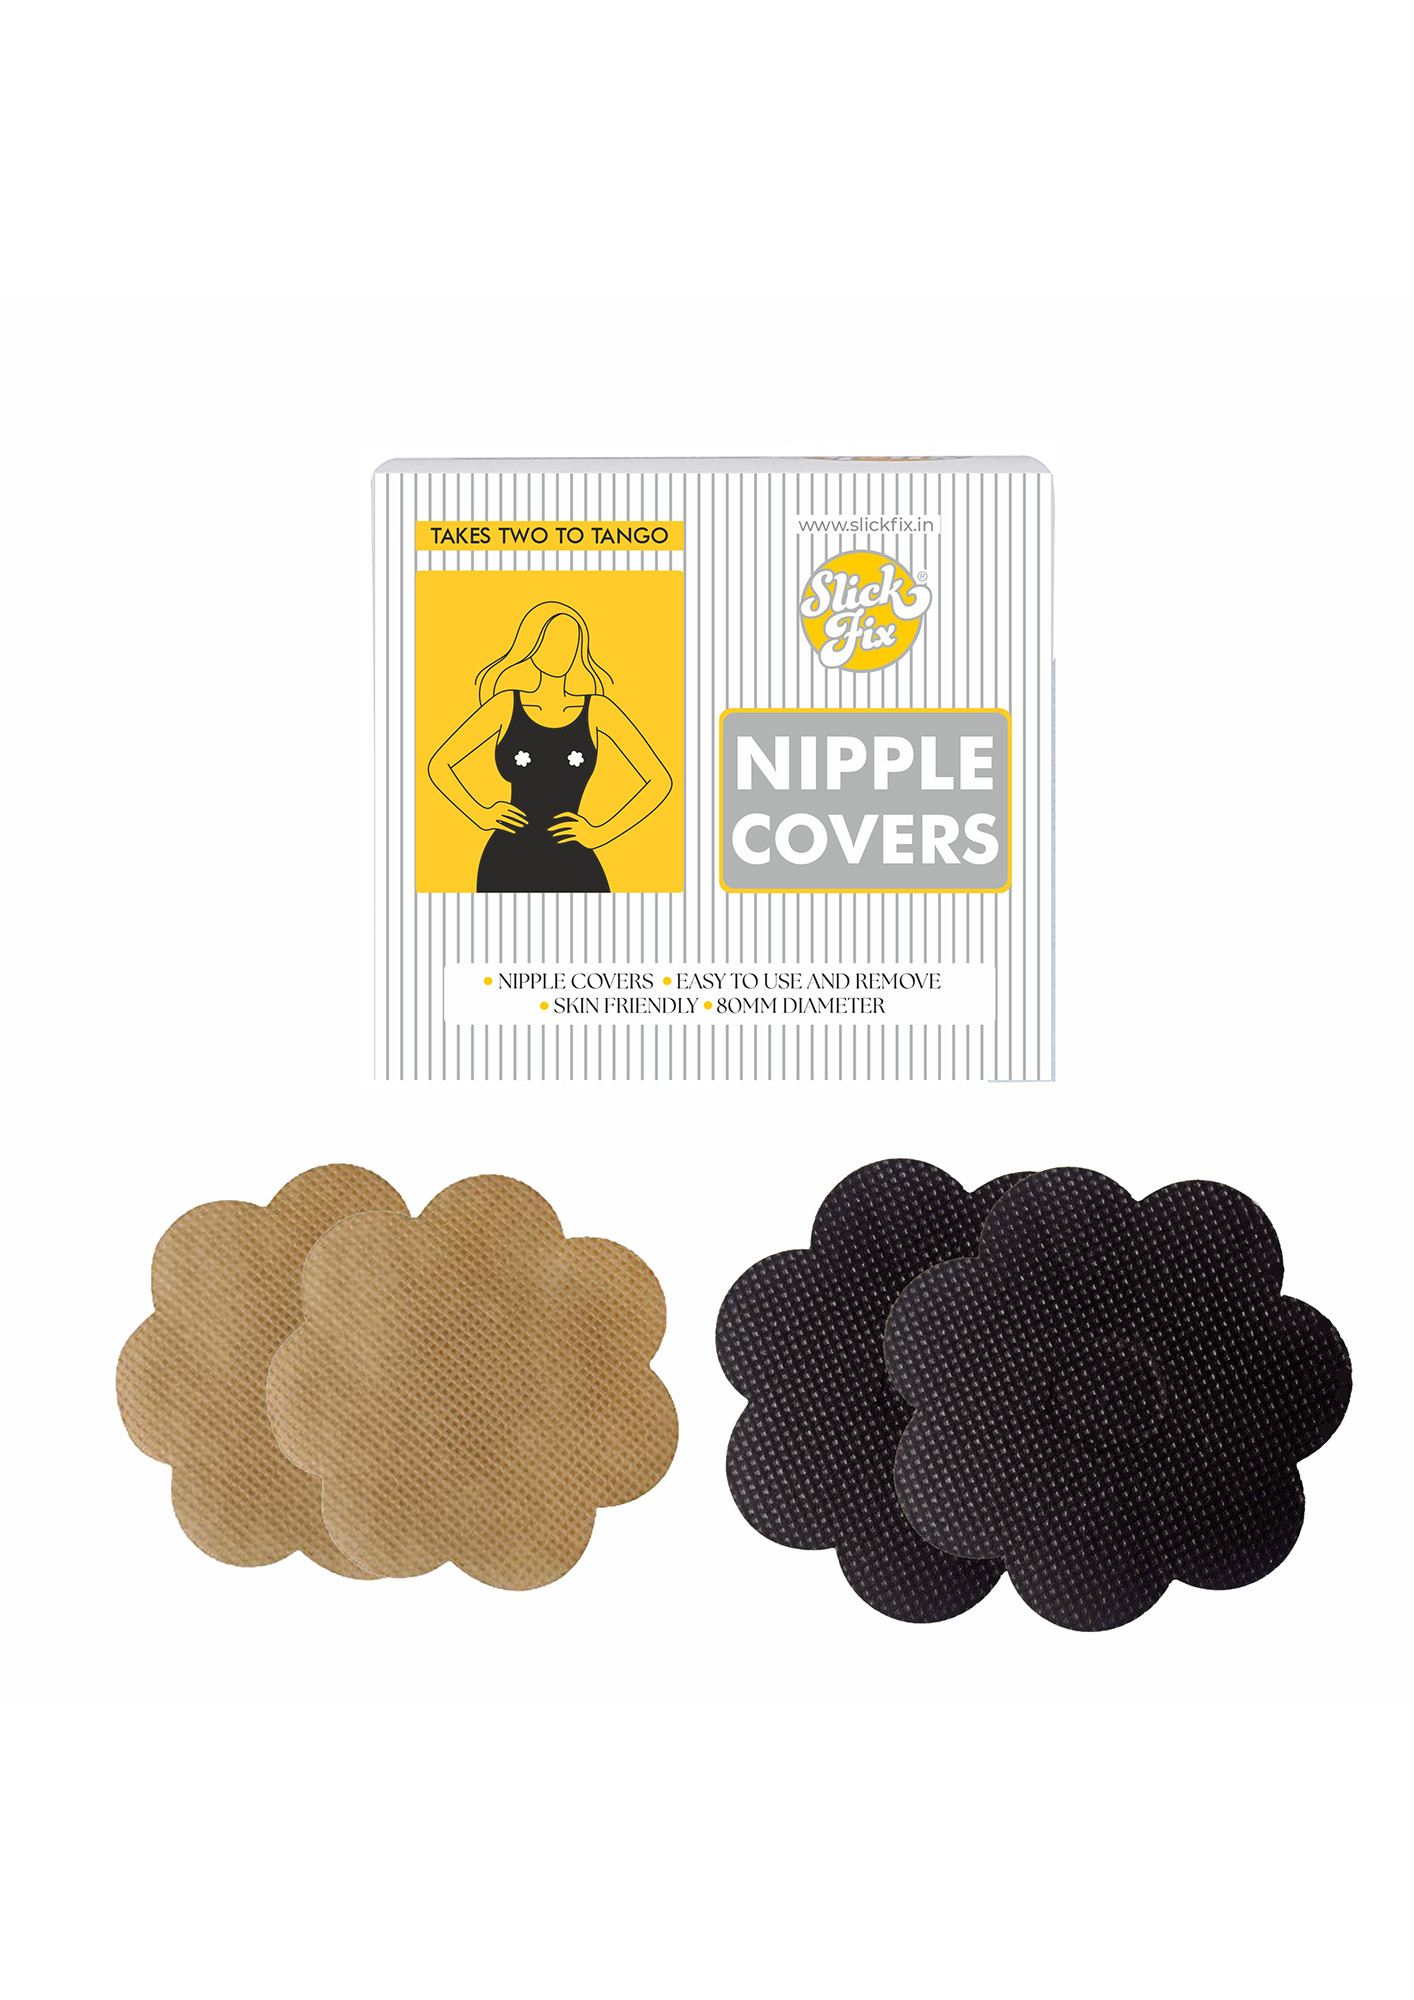 SLICKFIX Self Adhesive Nipple Covers Breast Concealer Mix Color (Black Colour - 10) (Skin Colour - 10) Pack of 20